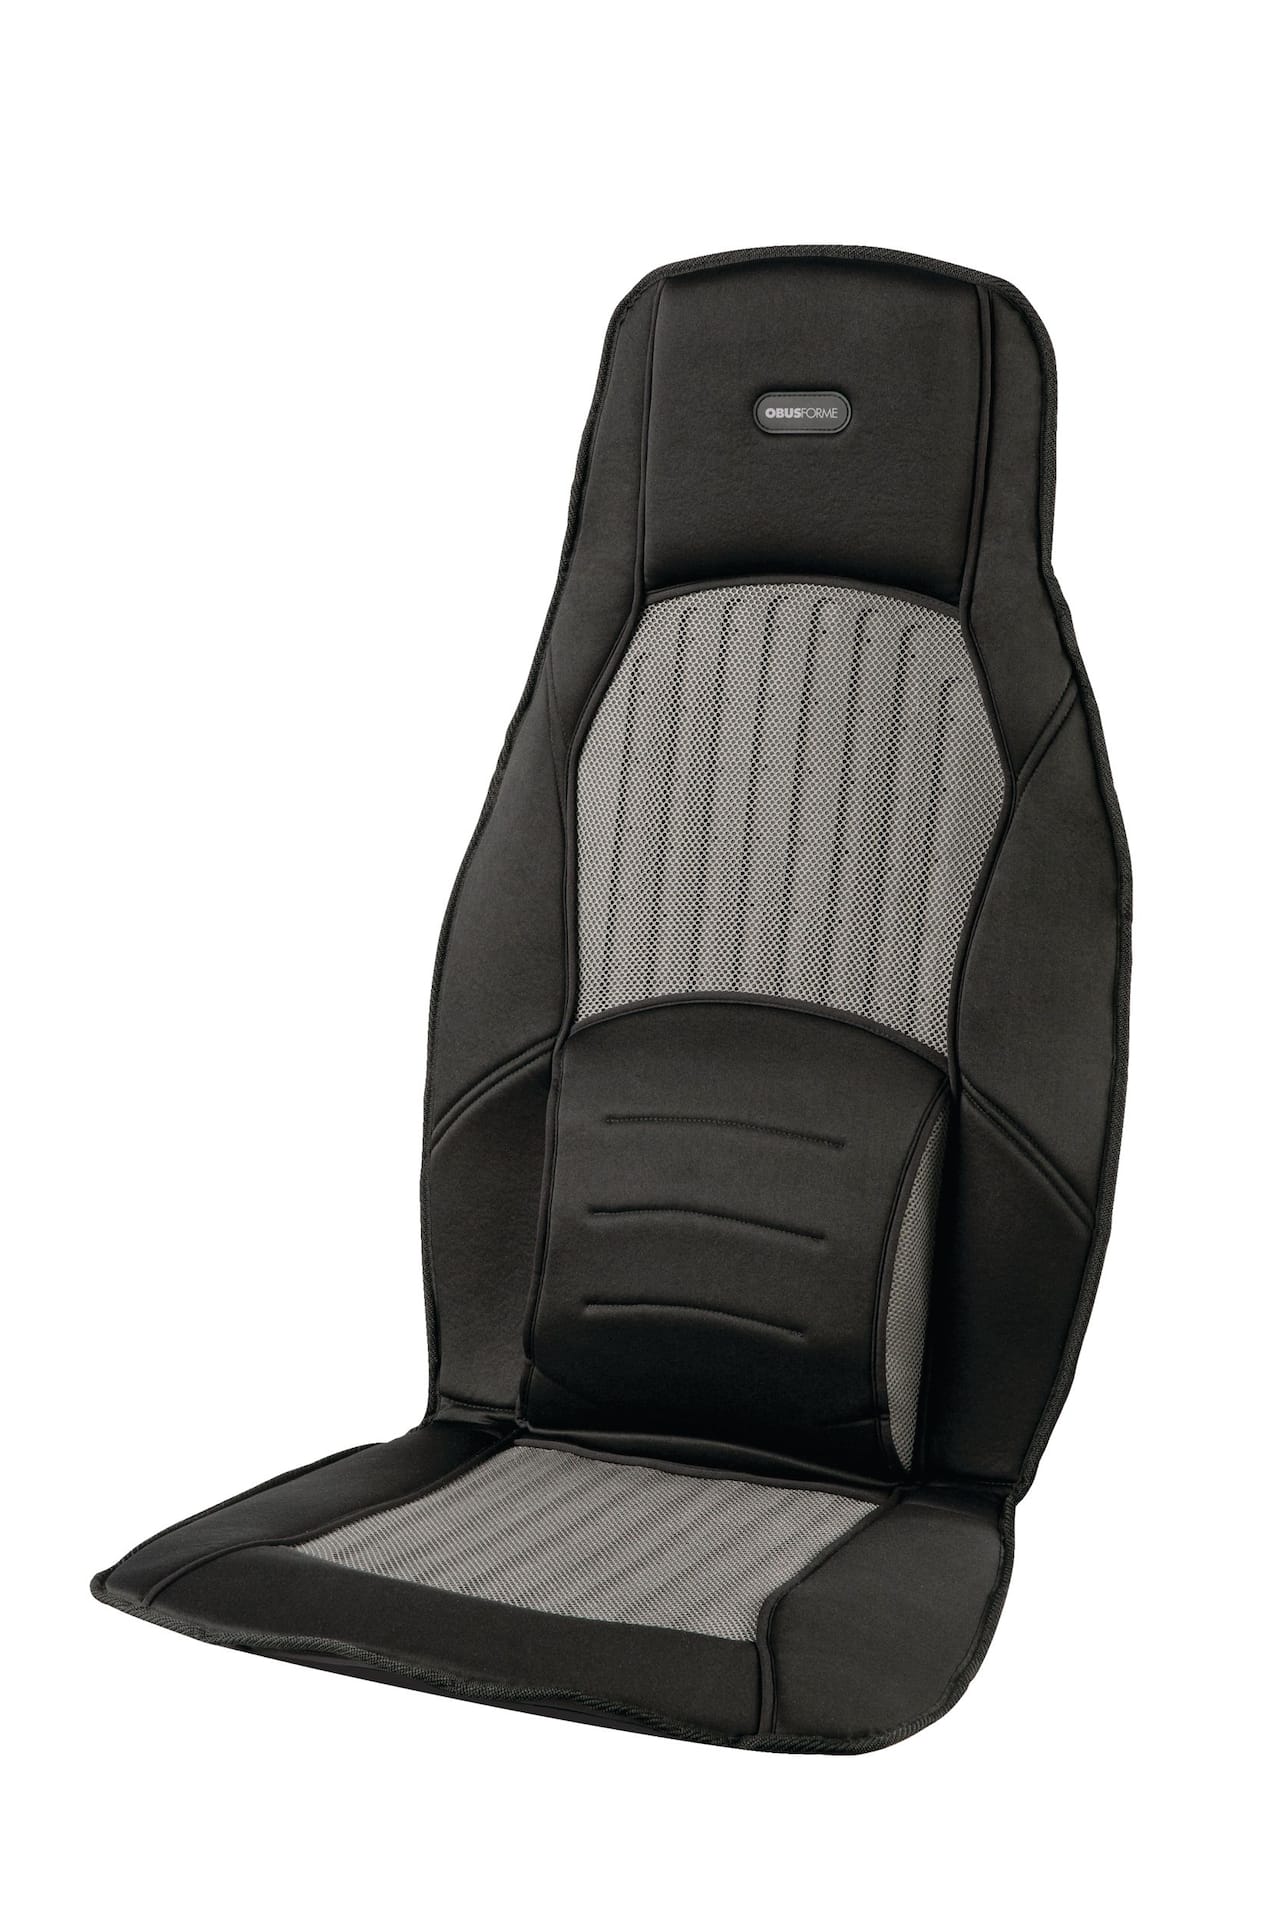 https://media-www.canadiantire.ca/product/automotive/car-care-accessories/auto-comfort/0327148/travel-cushion-with-heat-cool-and-vibration-dfbdd7d1-25e8-4d94-9a8e-3ea6dab724d2-jpgrendition.jpg